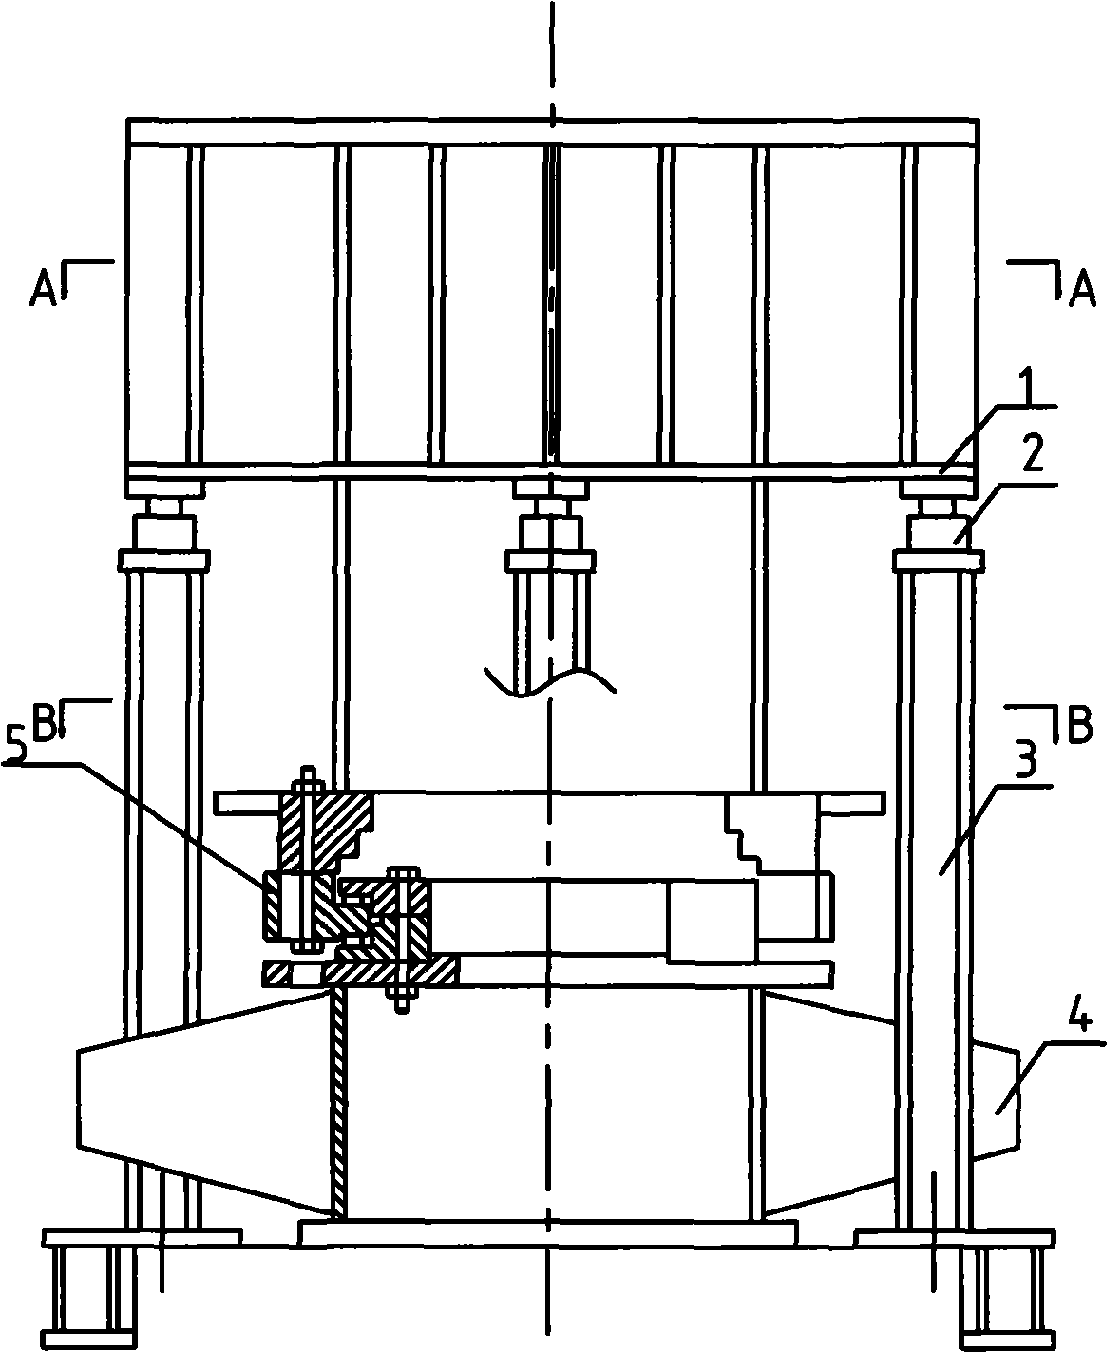 Method for quickly replacing pivotal bearing of bale panoramic tables